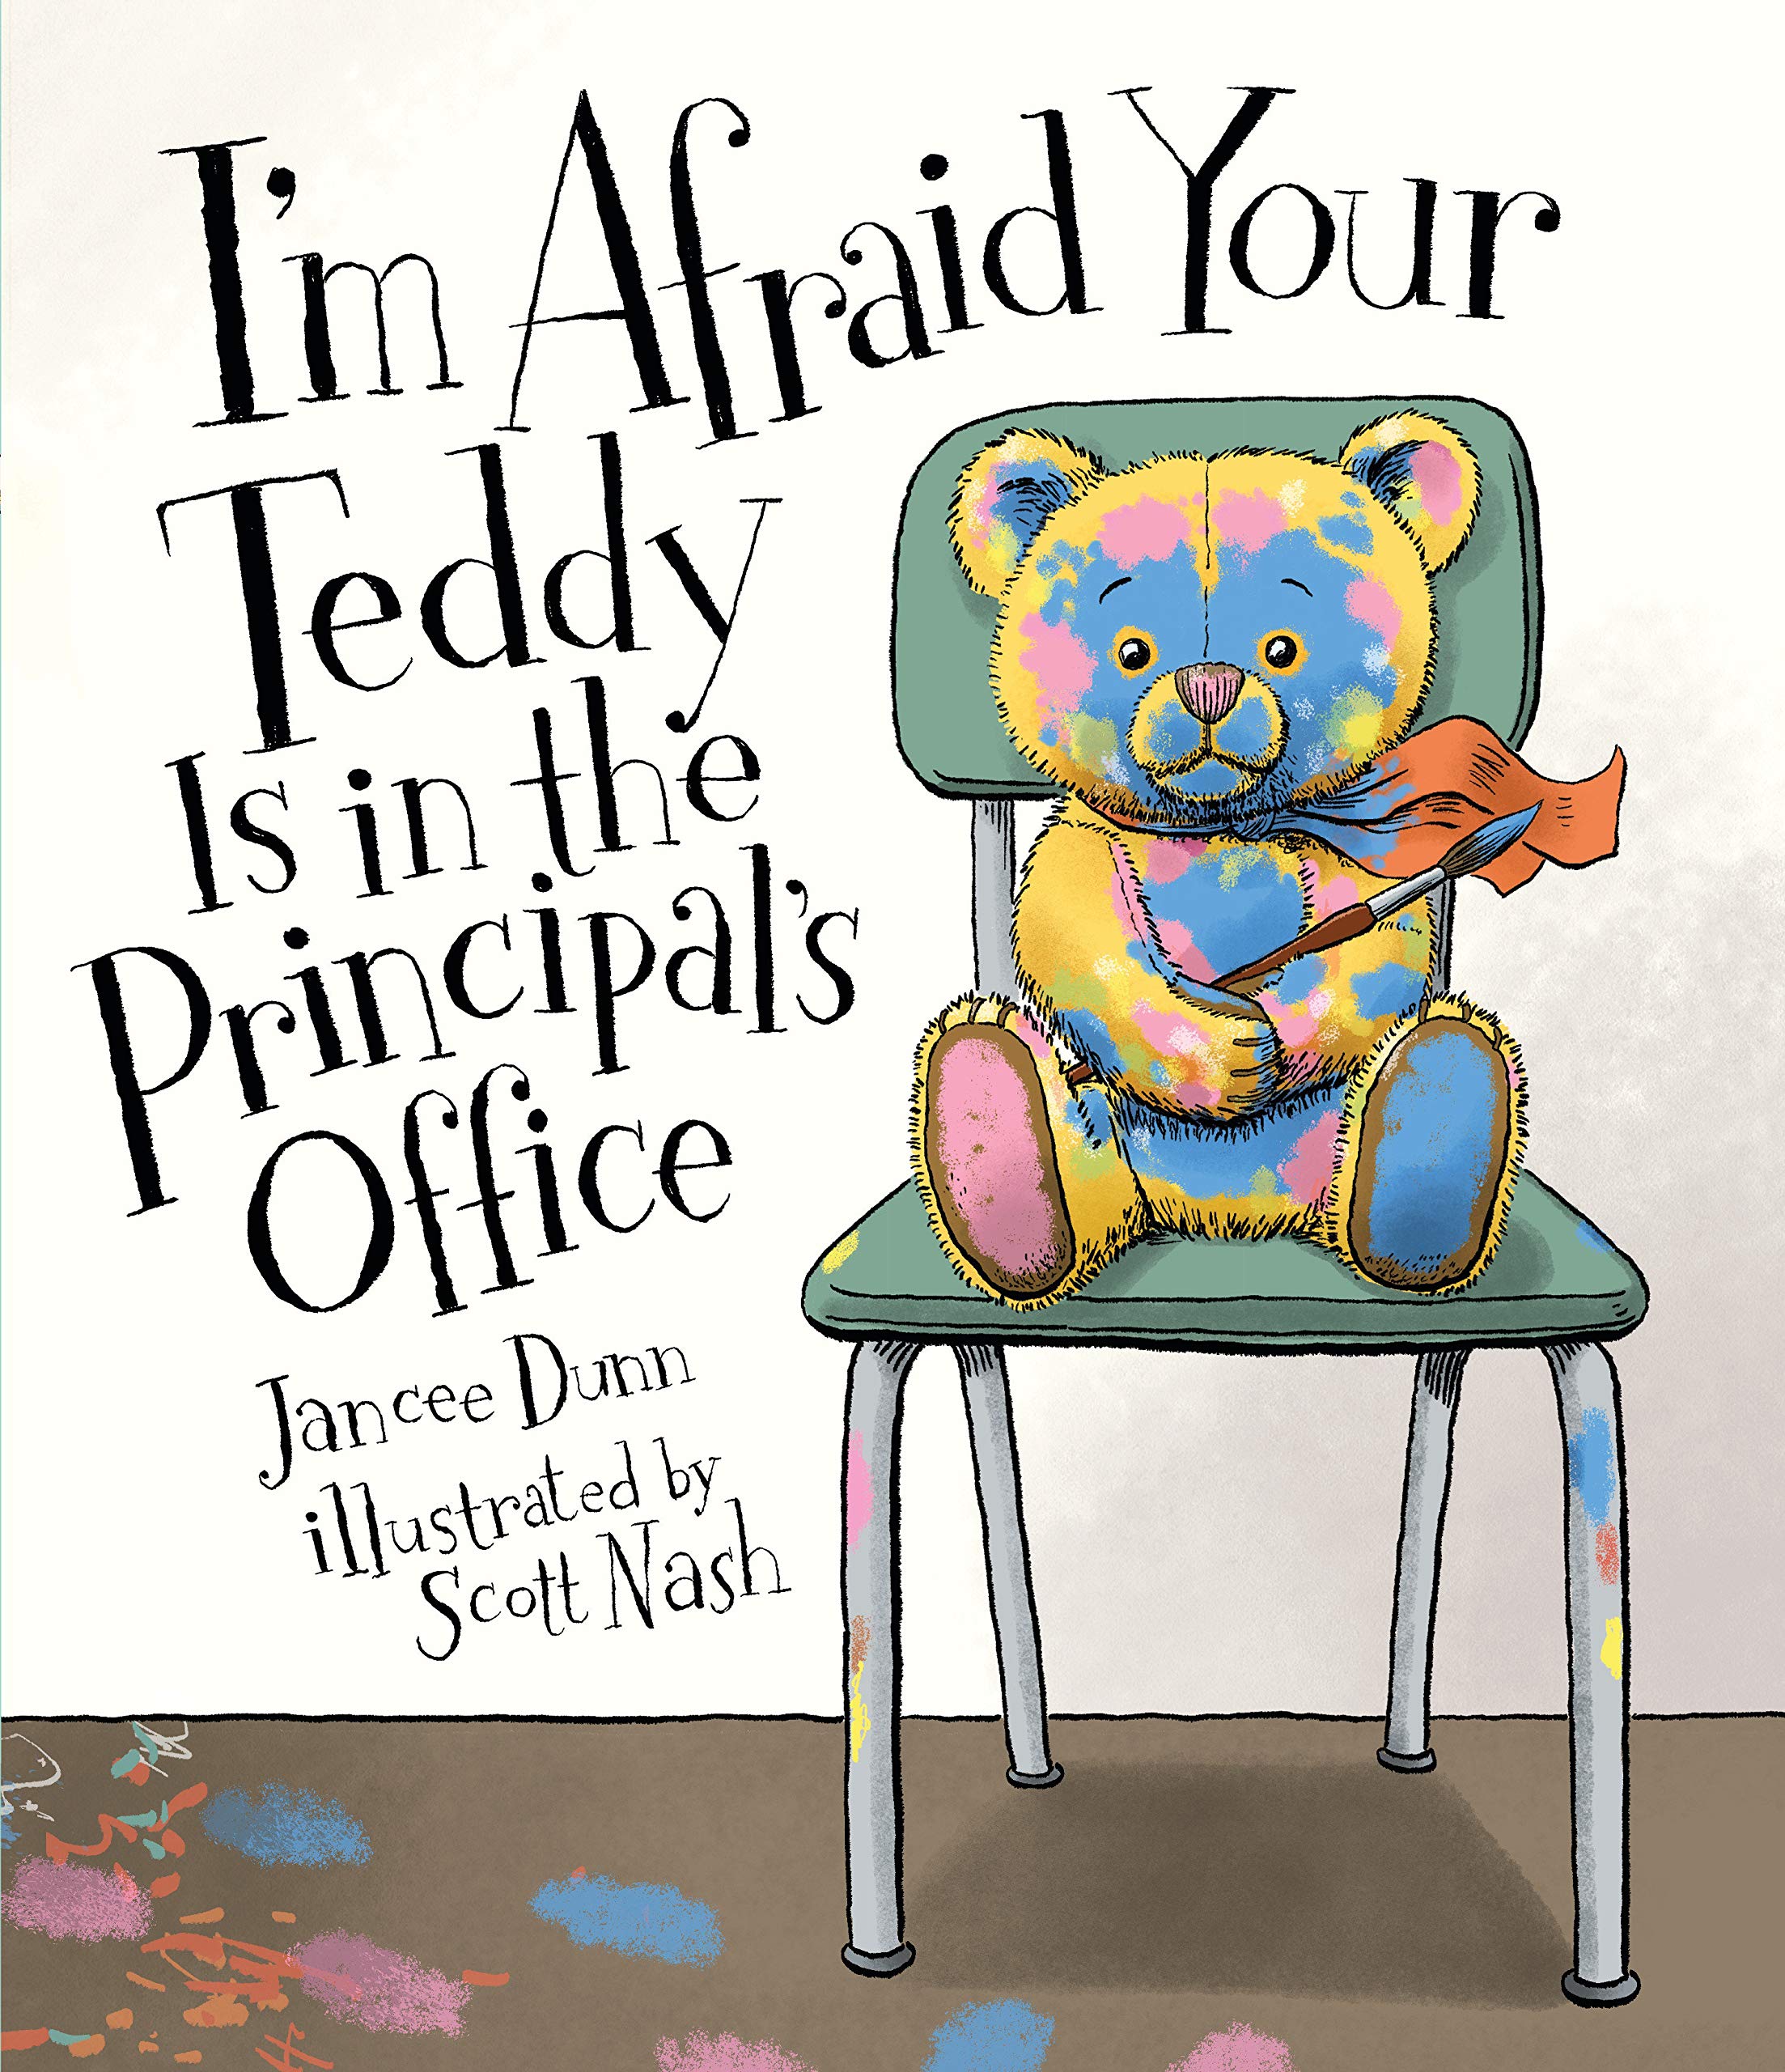 Illustration of a teddy bear covered in pink and blue paint sitting in a chair